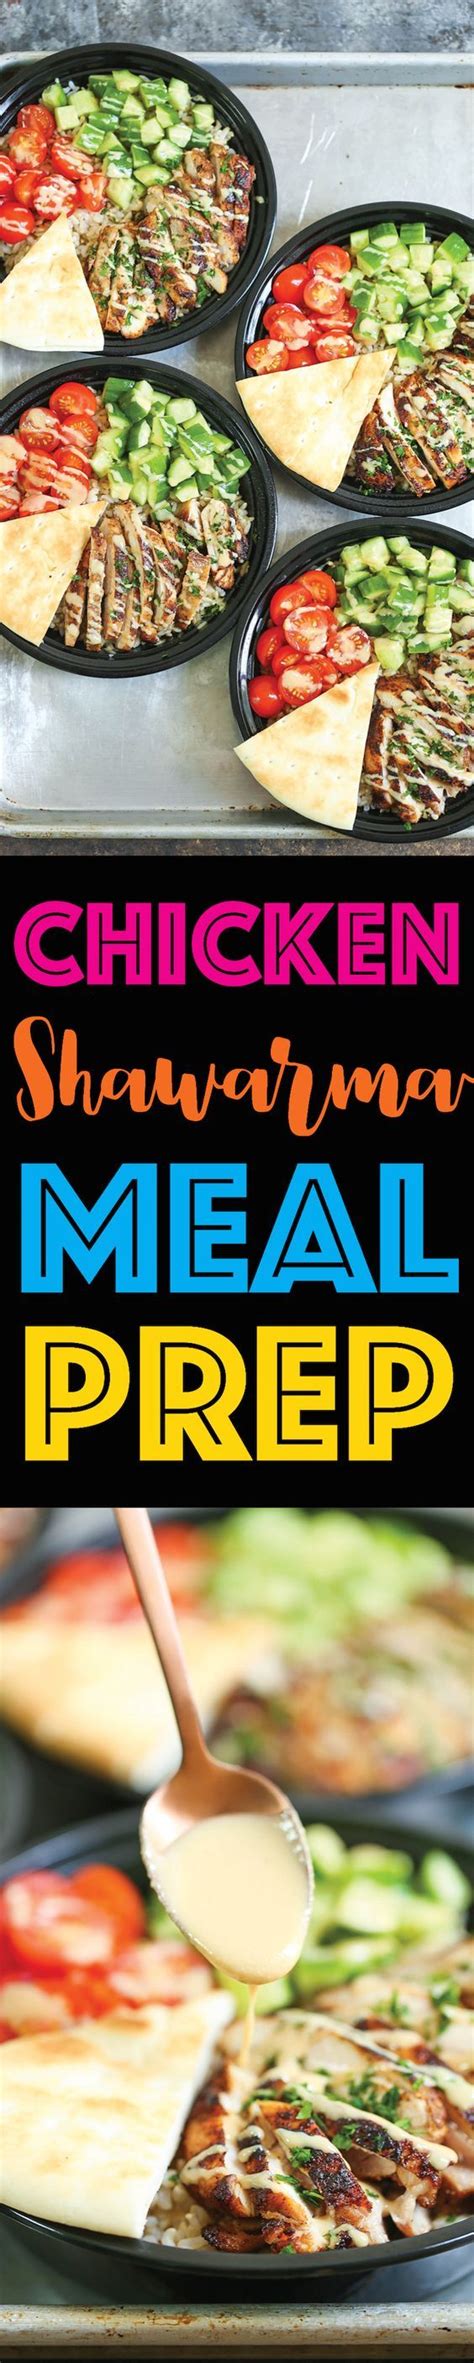 Try the chicken shawarma recipe at home from the method. Chicken Shawarma Meal Prep | Recipe (With images) | Lunch ...